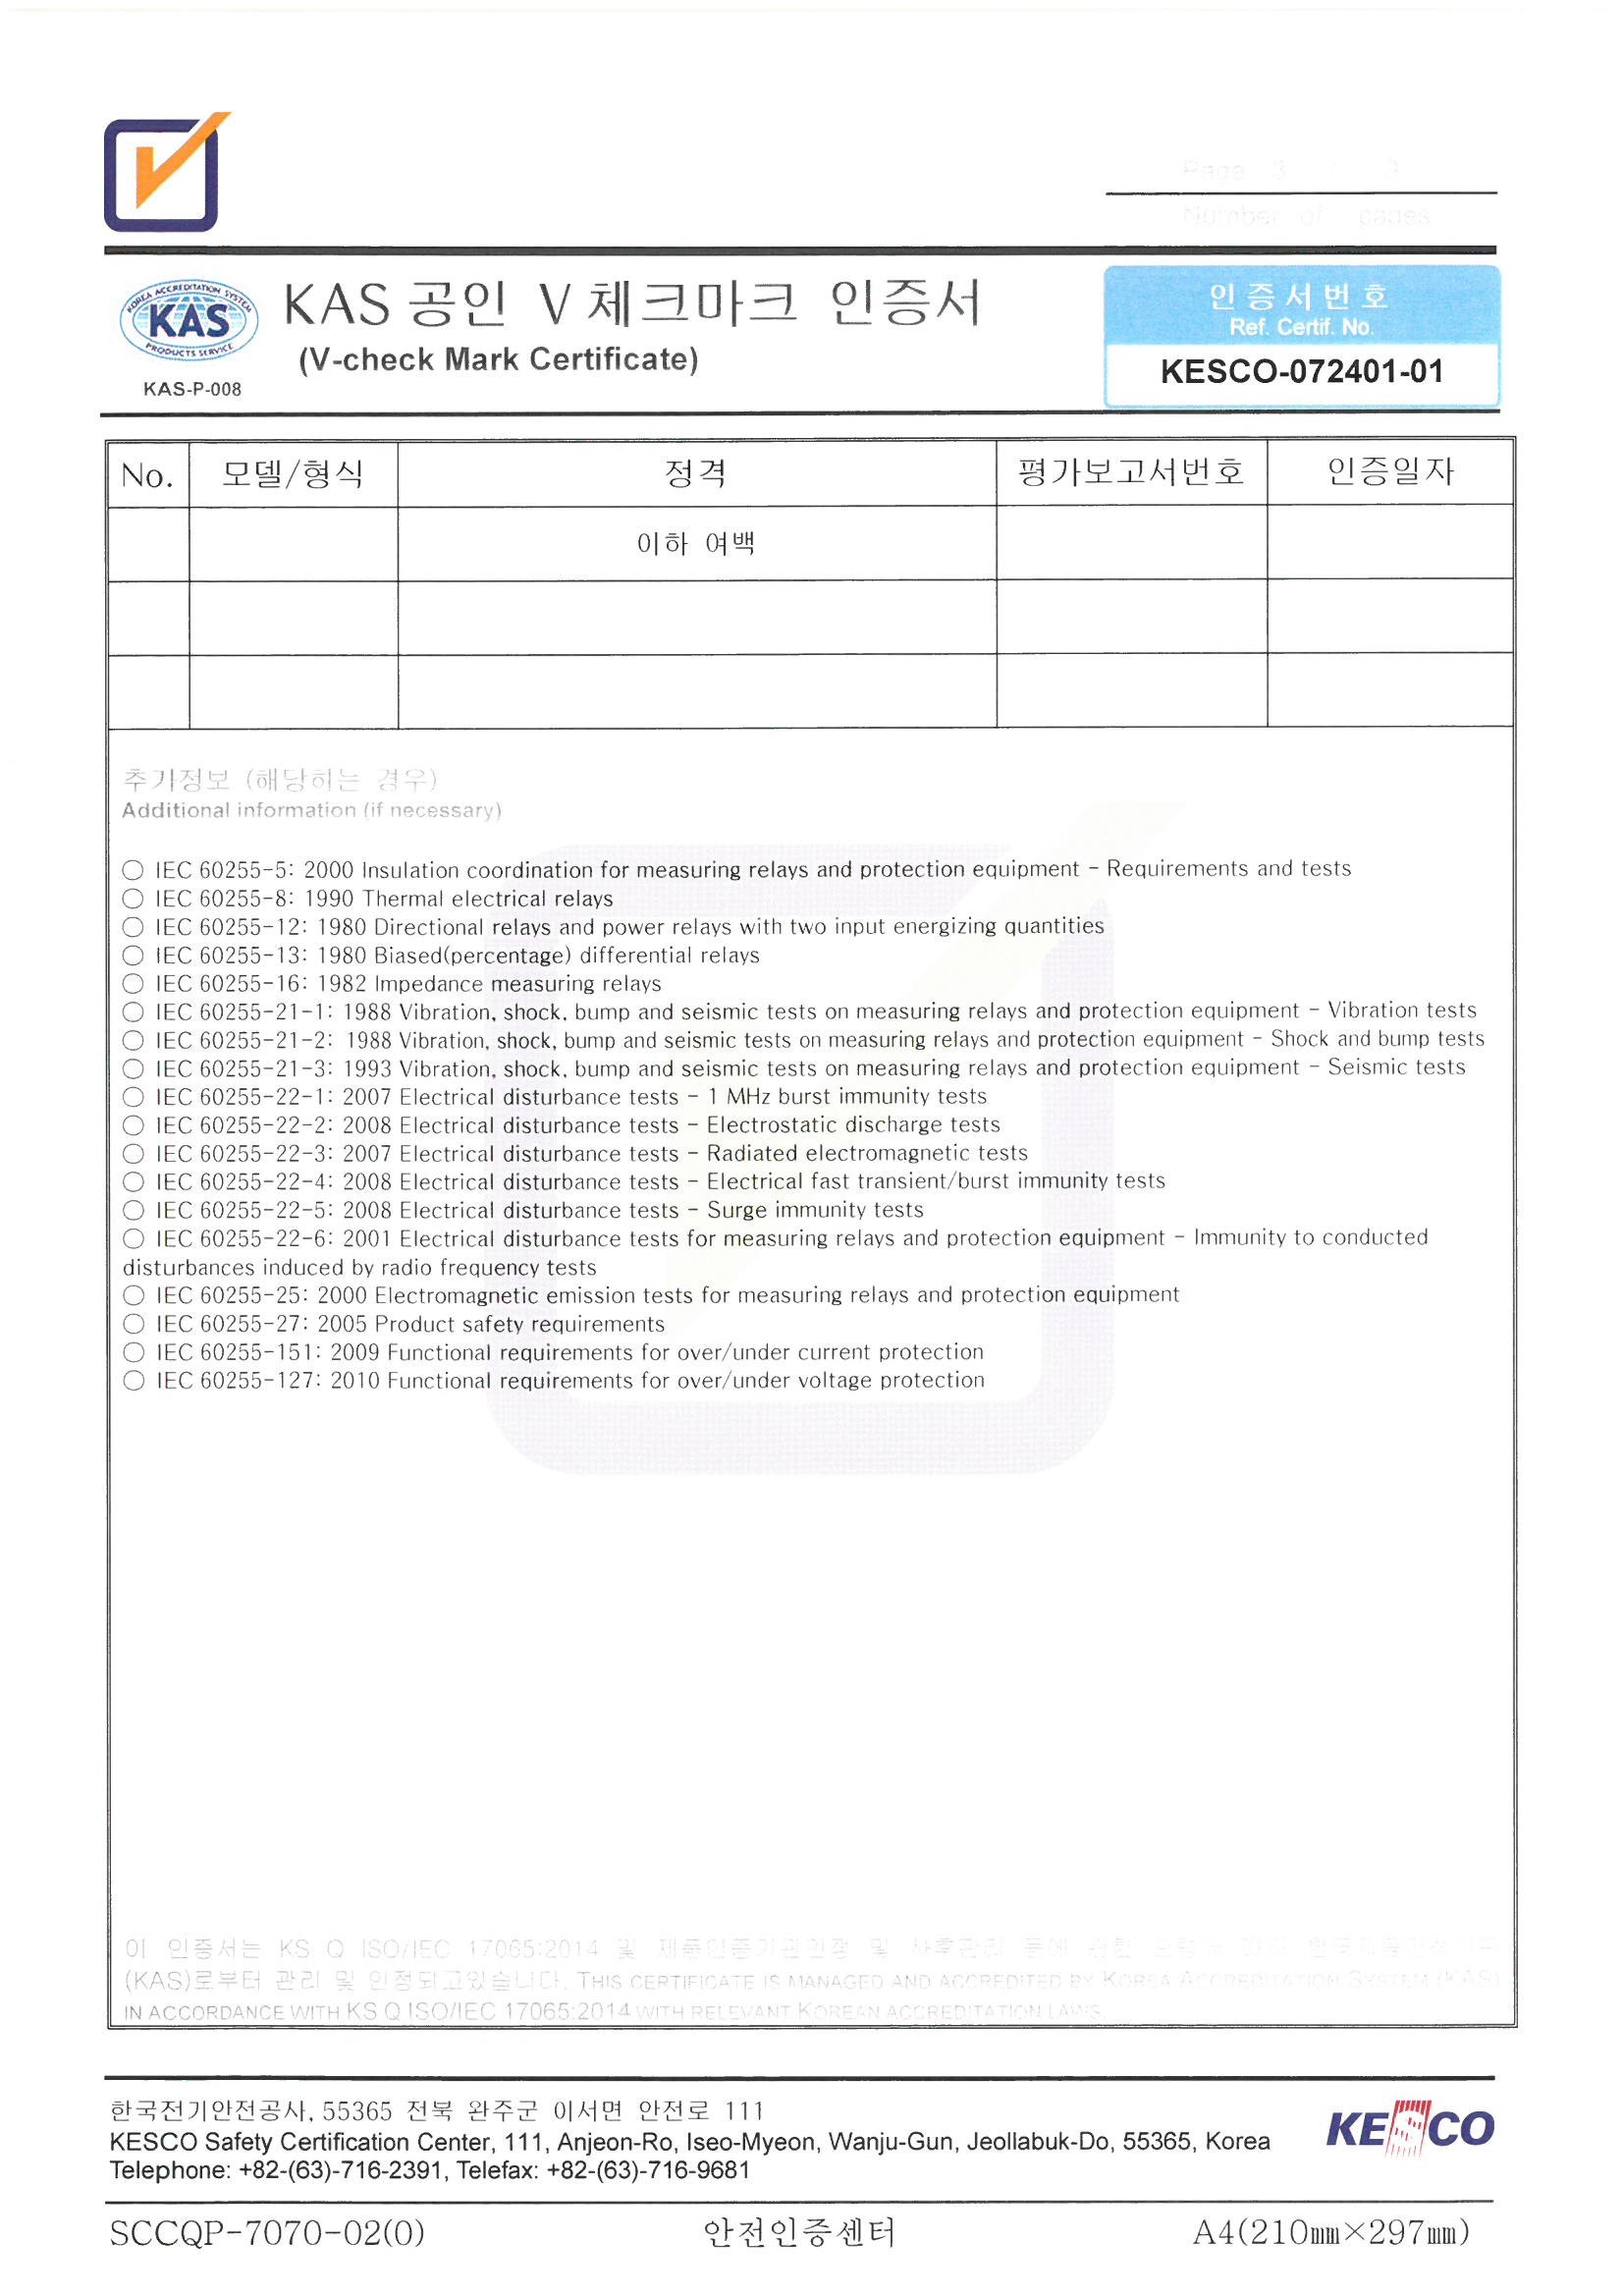 V-Check certification from Korea Electrical Safety Corporation_3.jpg